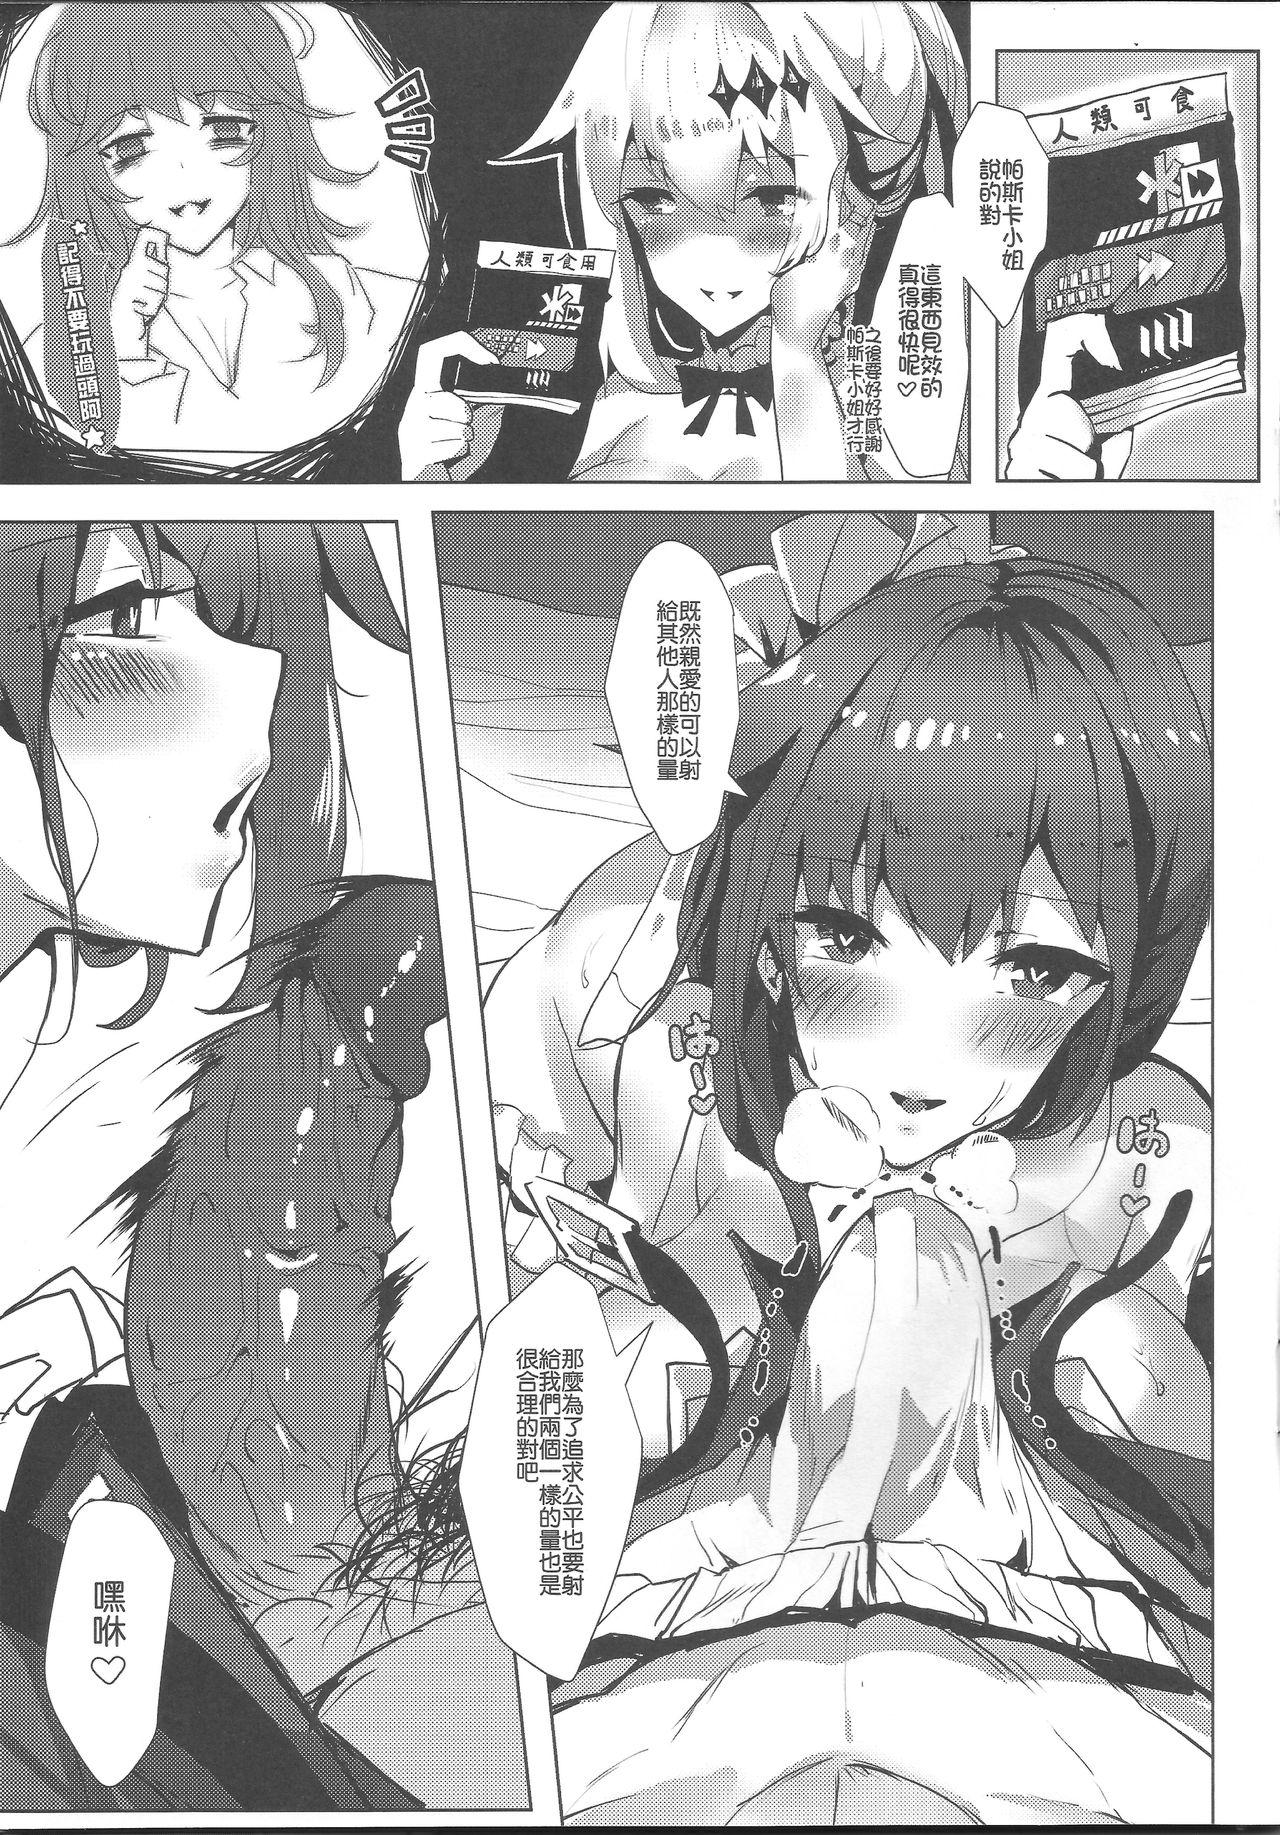 Plumper FN`s Special Marking - Girls frontline Barely 18 Porn - Page 12